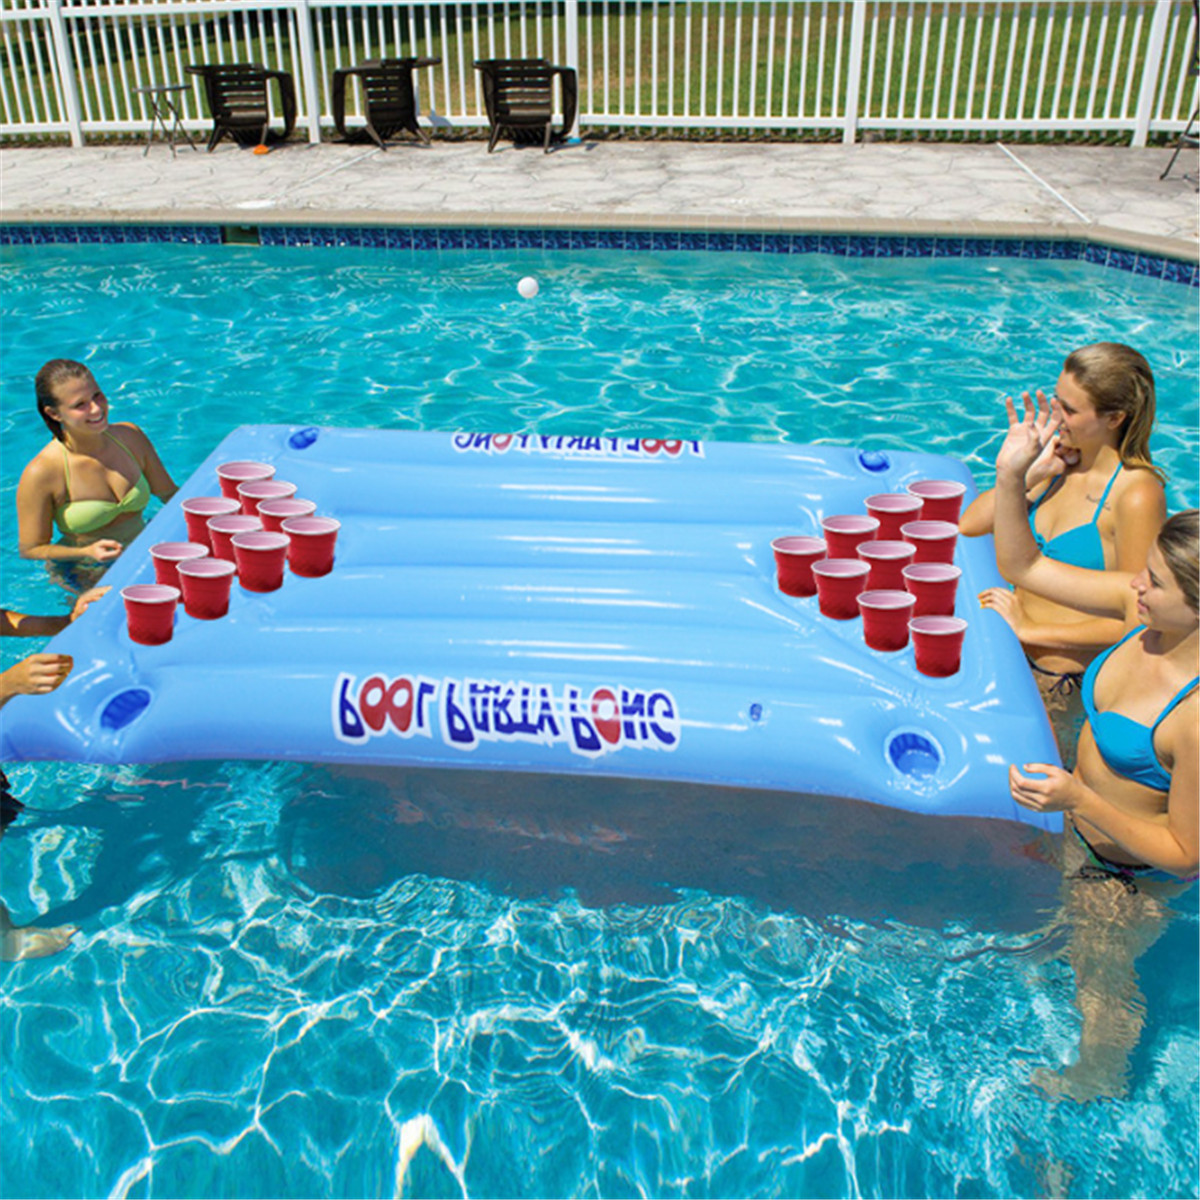 PVC-Inflatable-Beer-Pong-Ball-Table-Water-Floating-Raft-Lounge-Pool-Drinking-Game-24-Cups-Holder-1231572-1